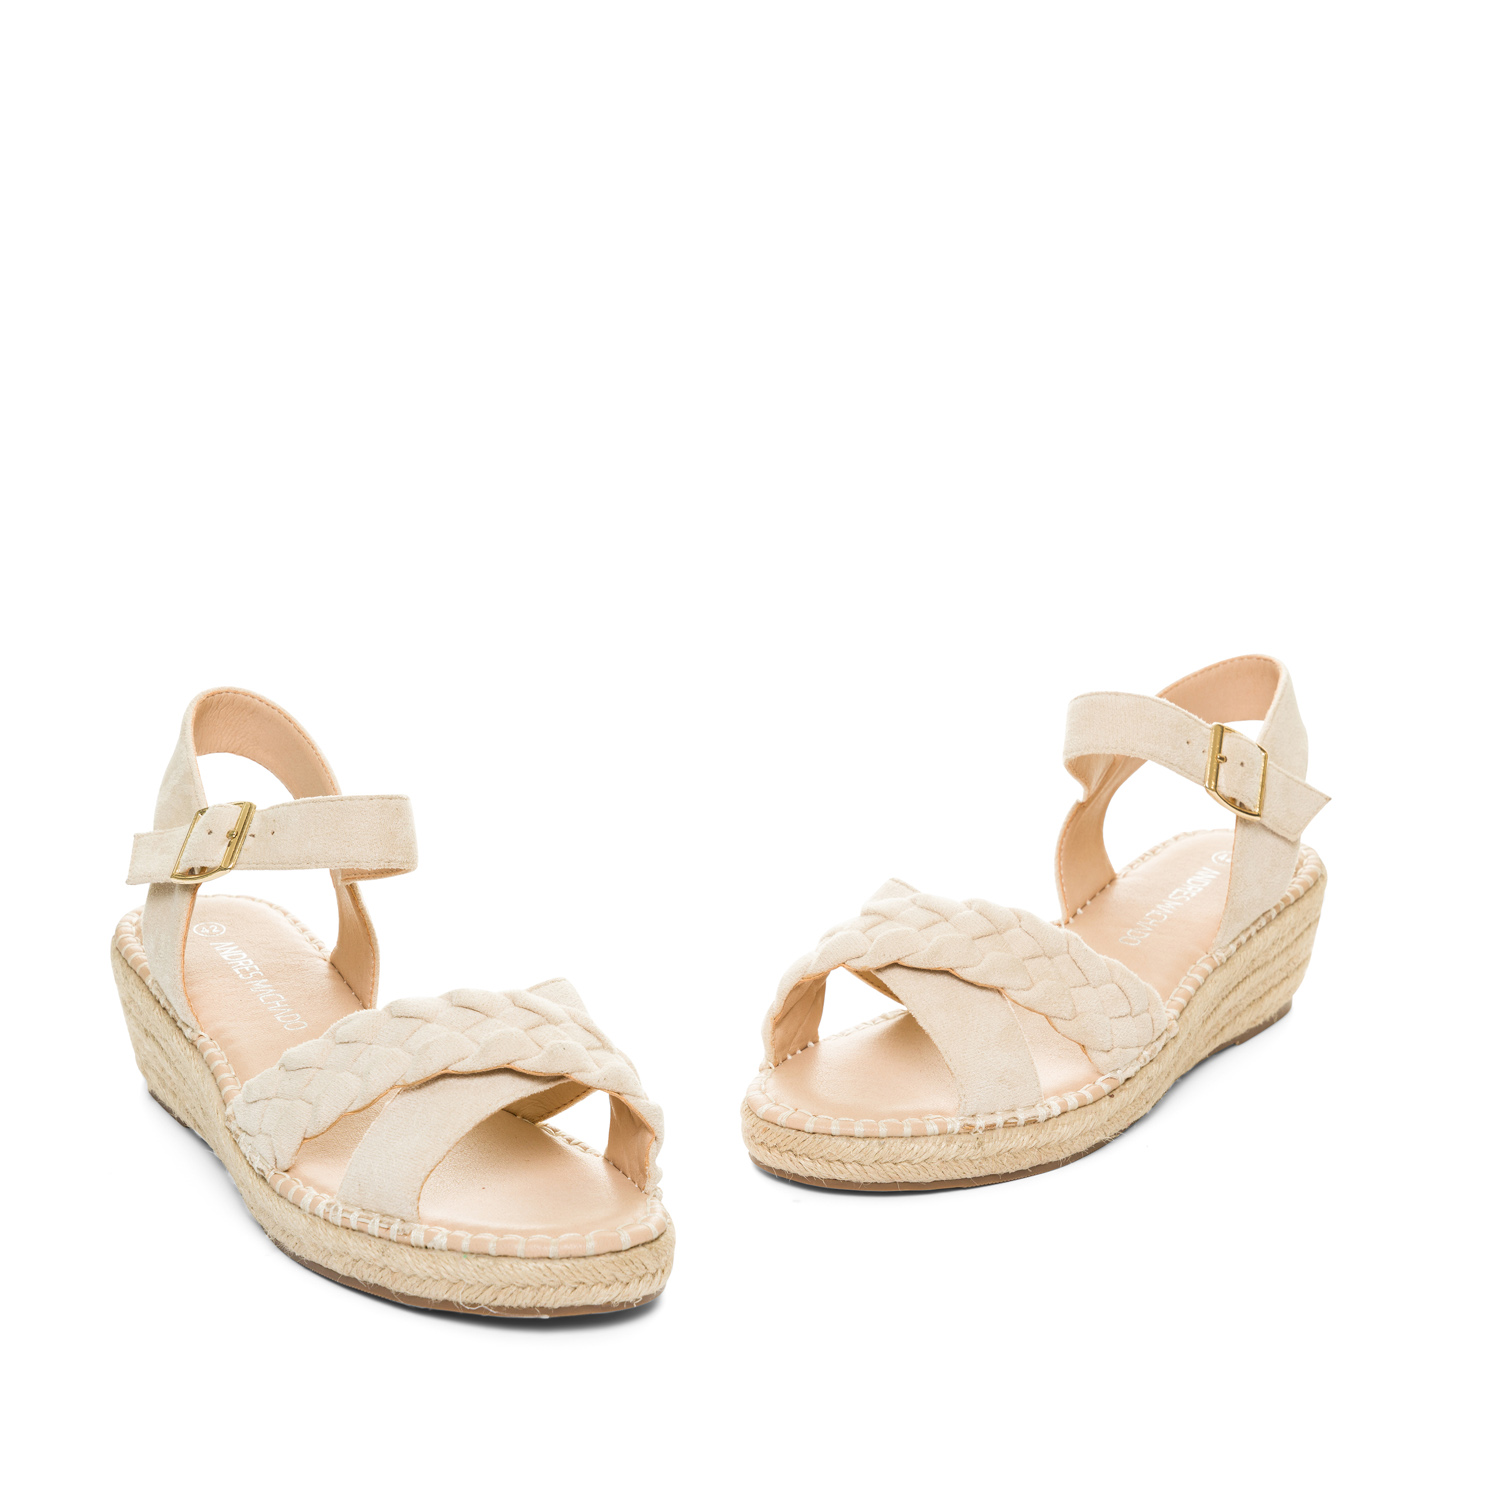 Off-white faux suede sandals with jute wedge 